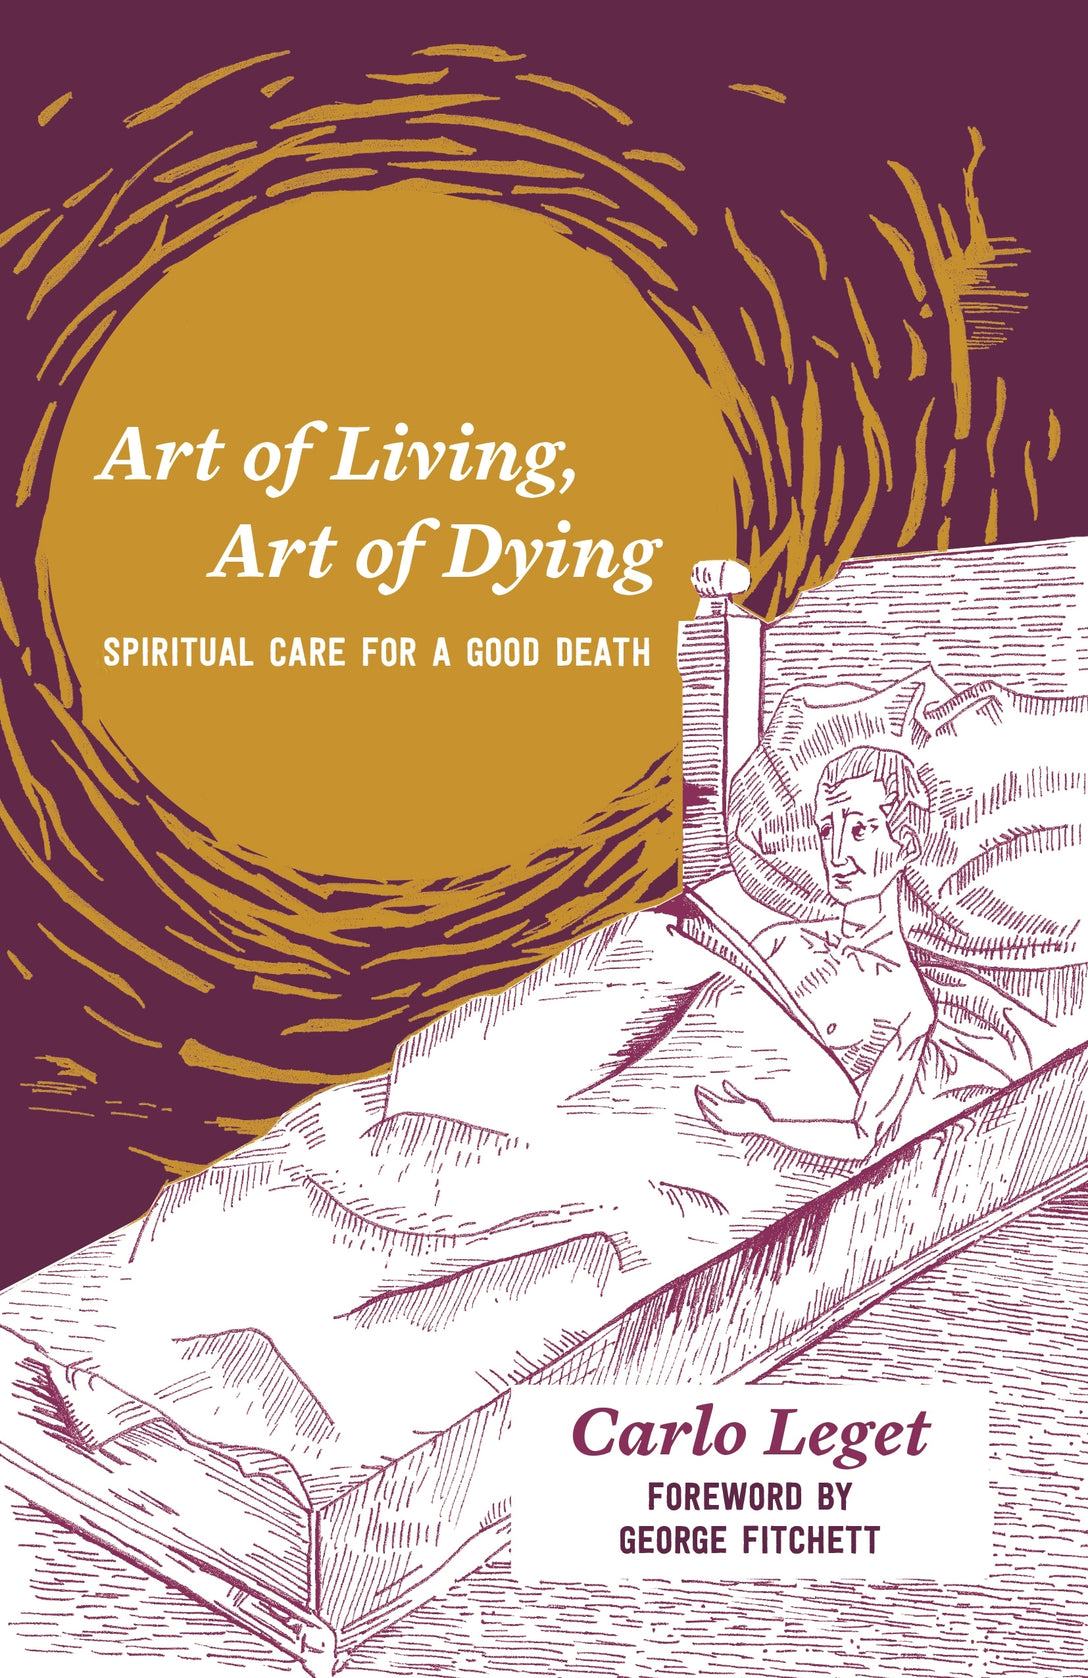 Art of Living, Art of Dying by George Fitchett, Carlo Leget